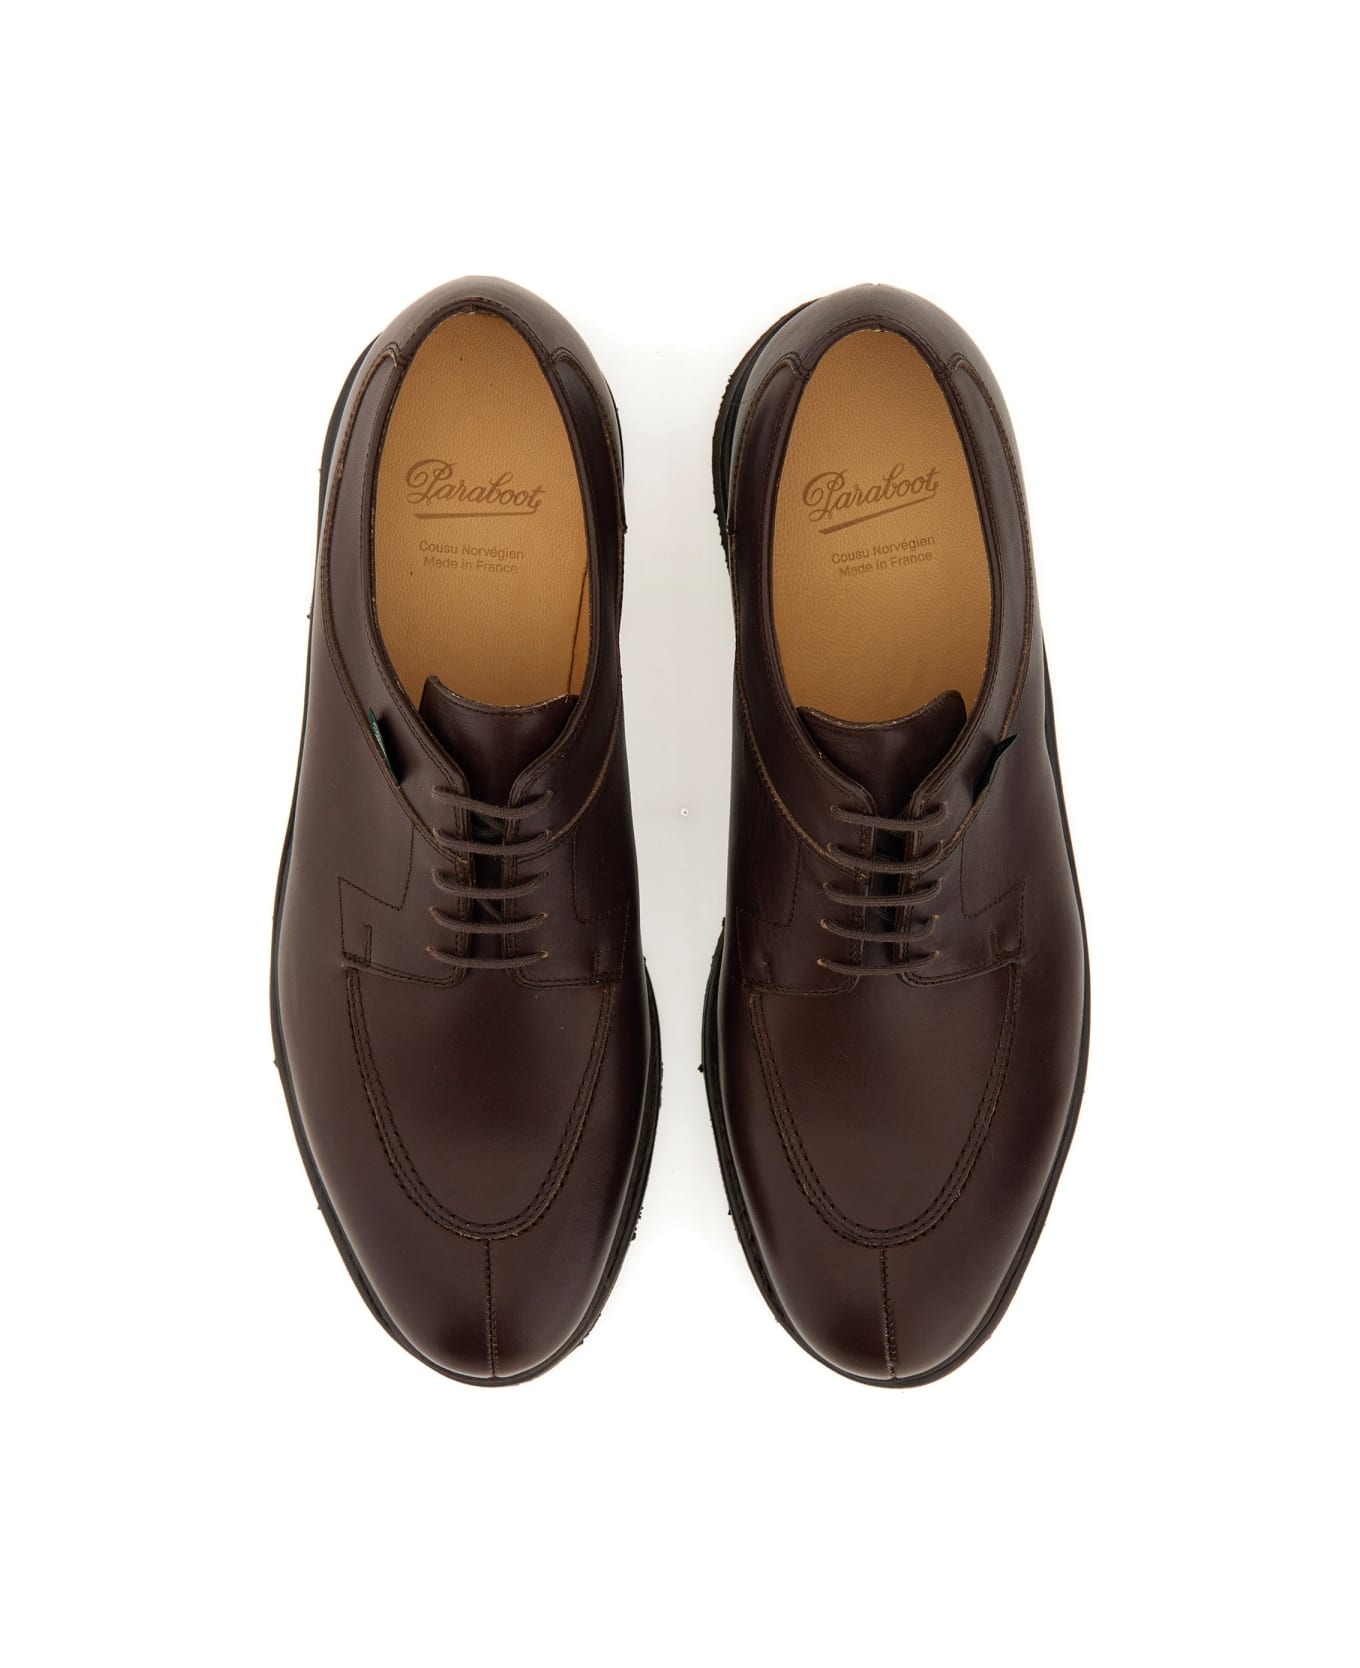 Paraboot Lace-up Avignon - BROWN